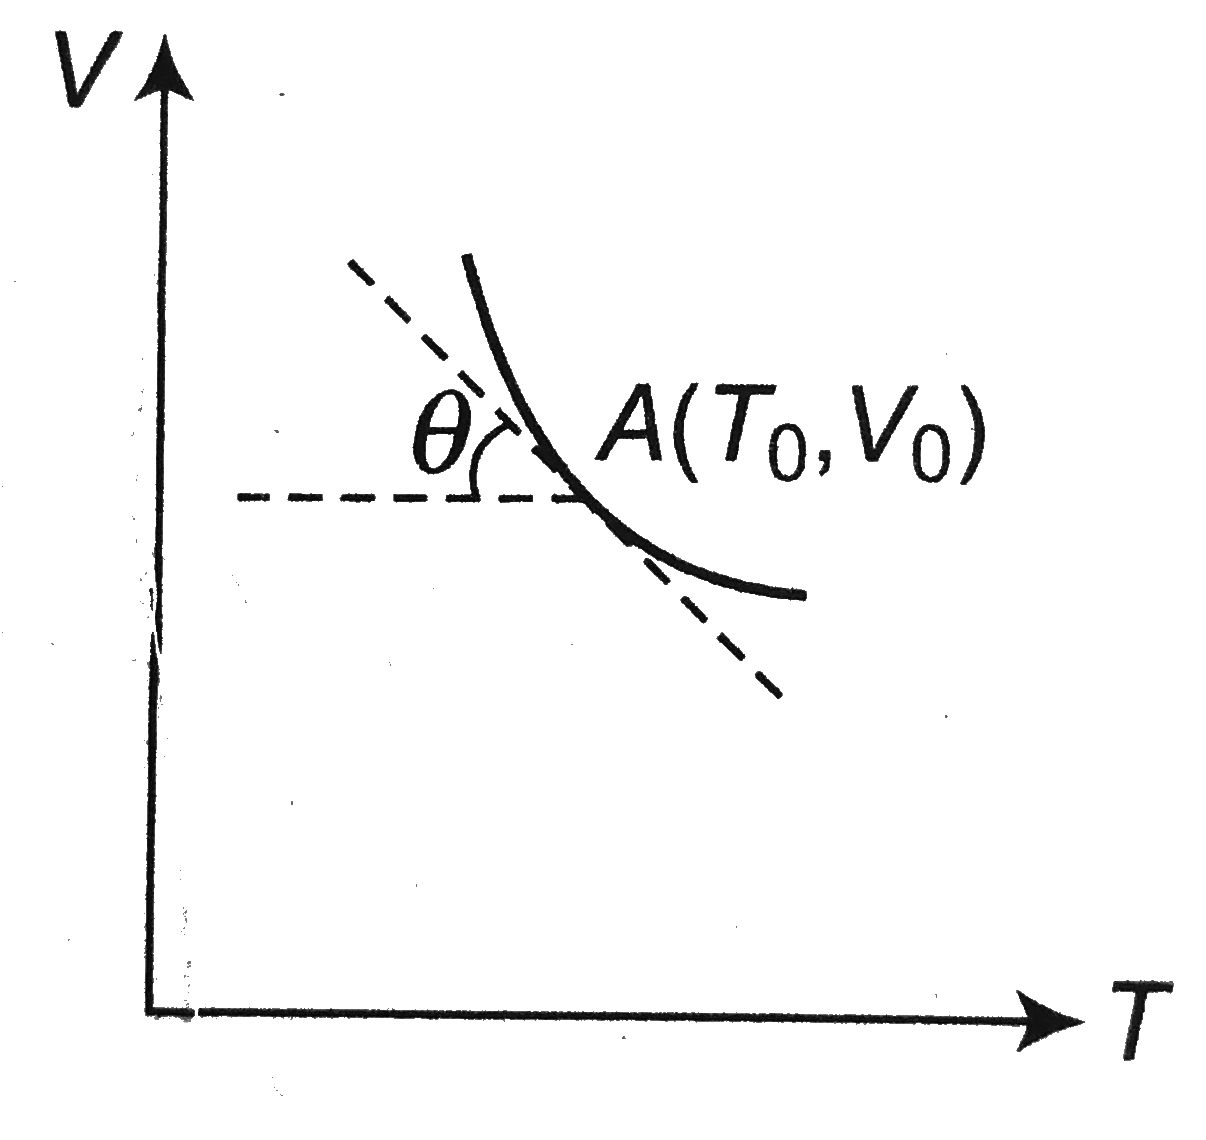 A gas is undergoing an adiabatic process. At a certain stage A, the values of volume and temperature (V(0), T(0)). From the details given in the graph, find the value of adiabatic constant gamma